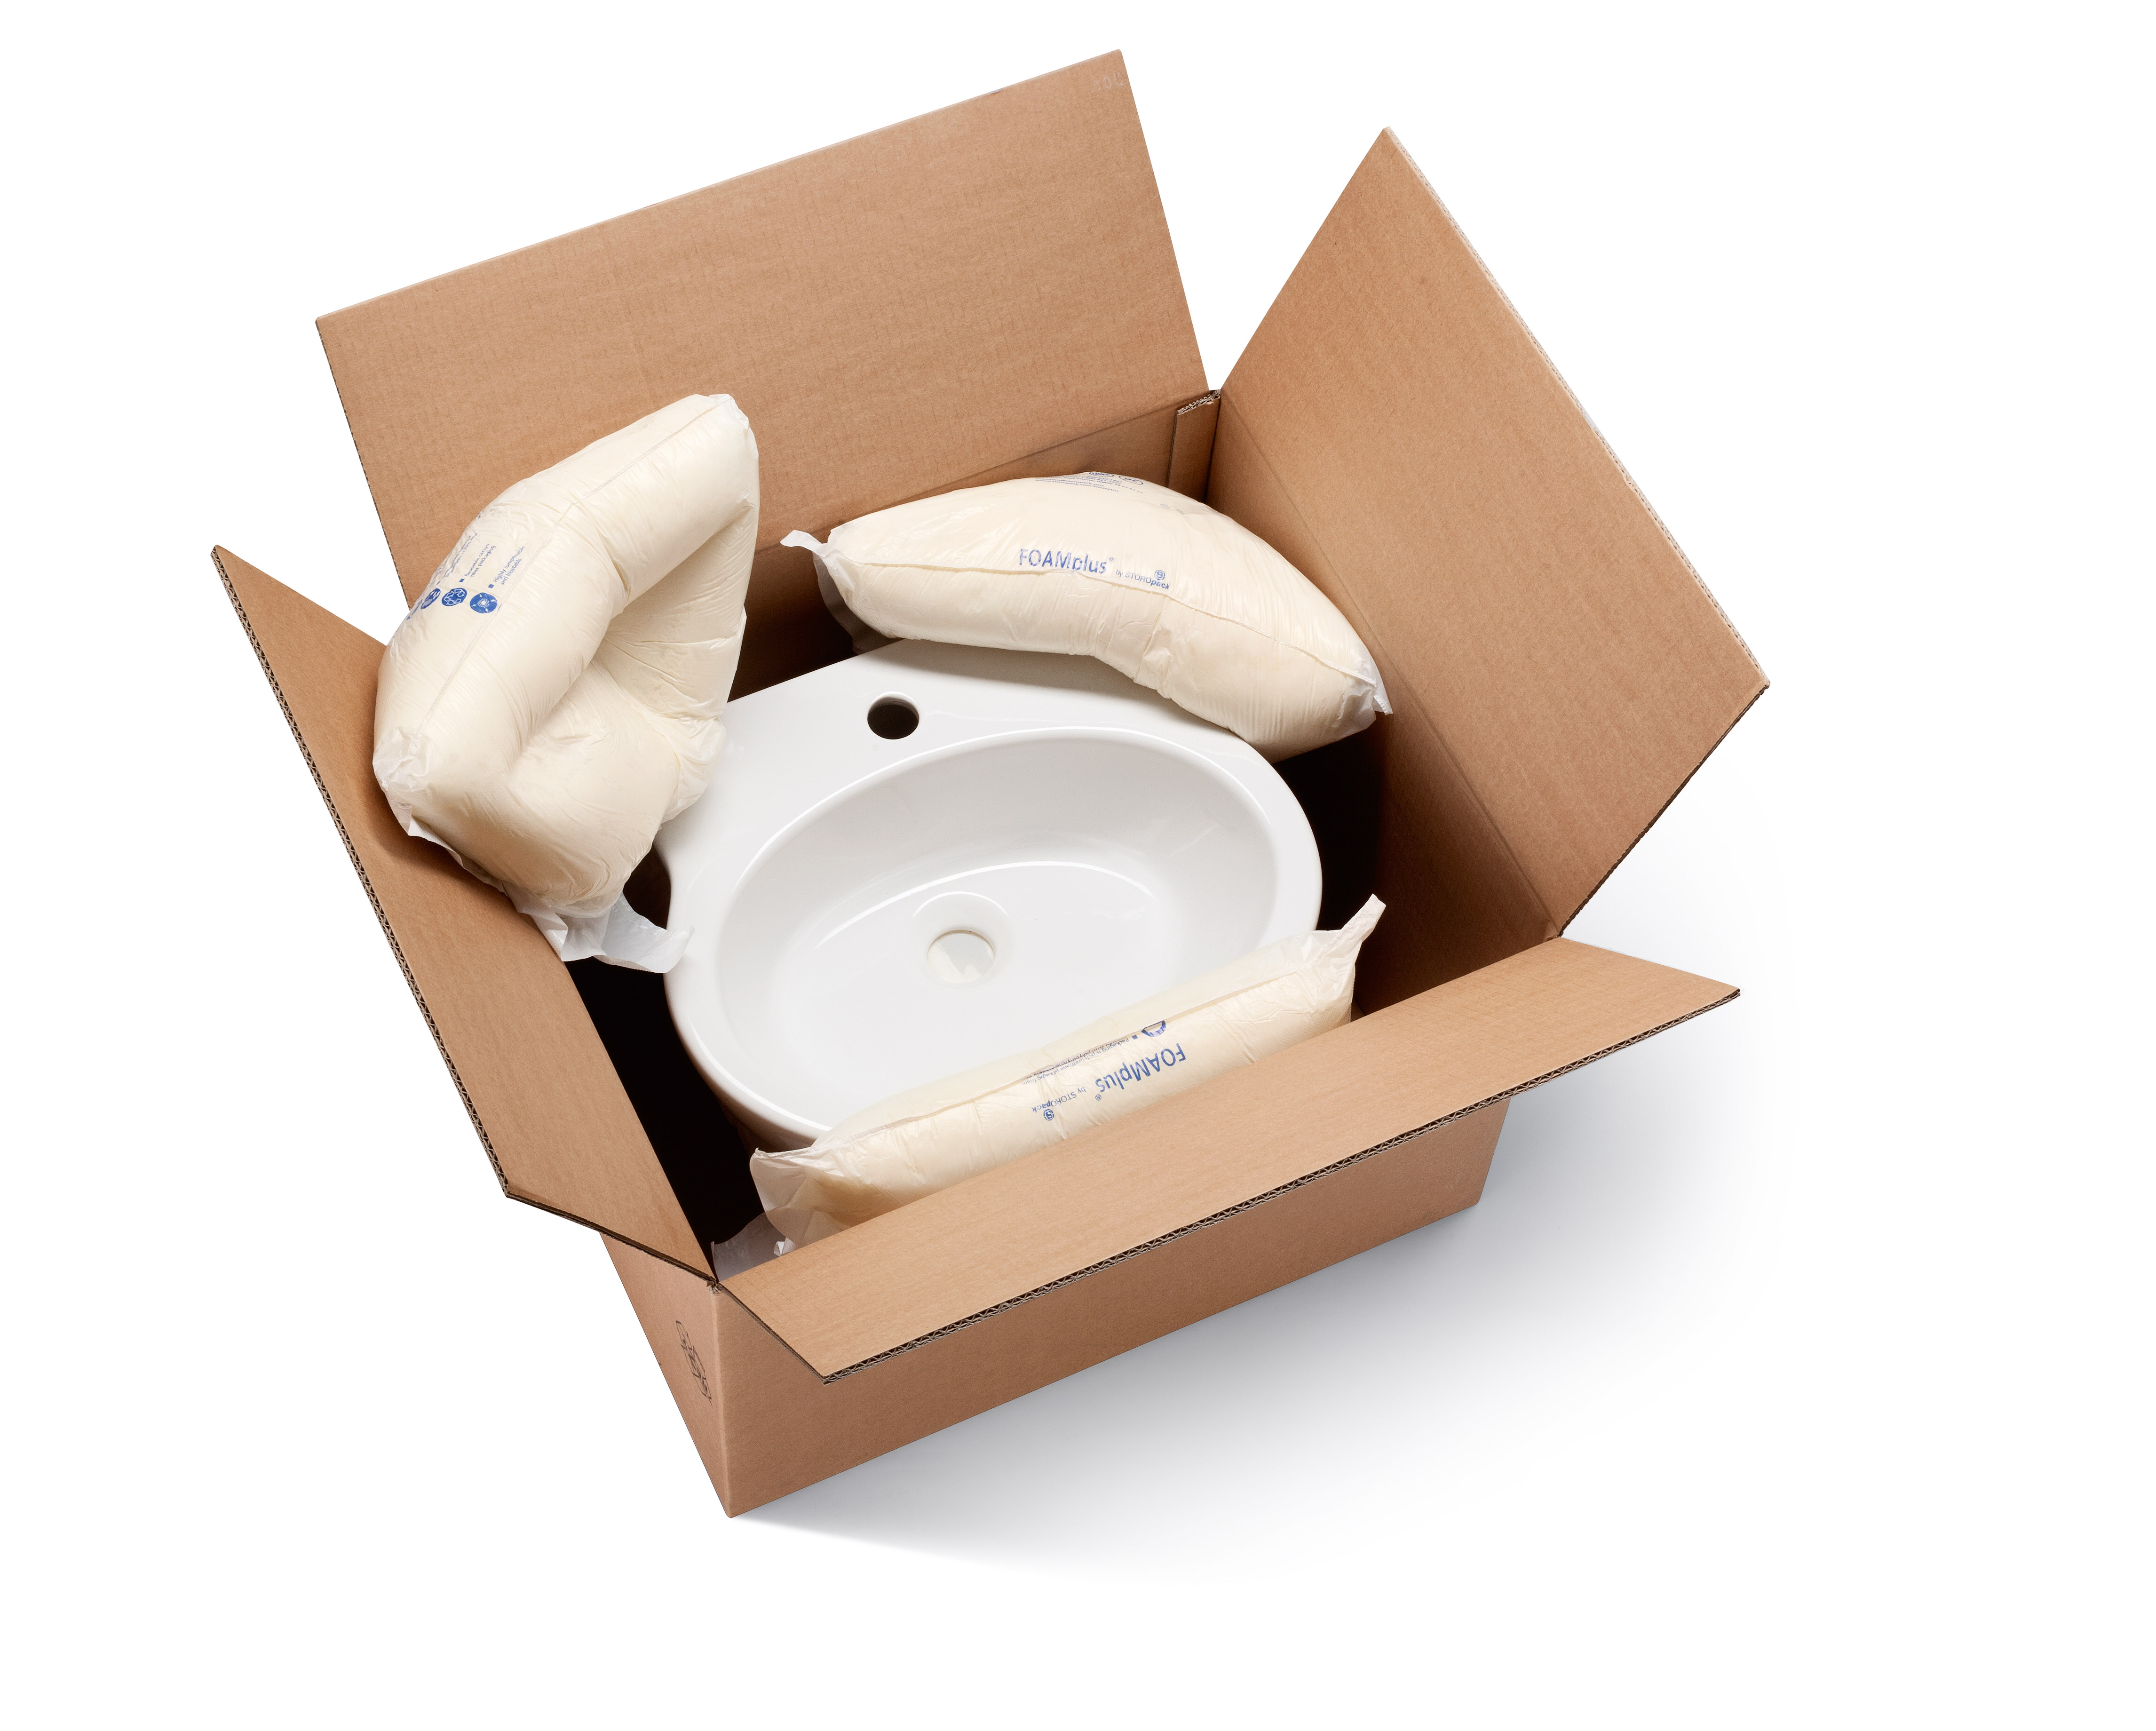 FOAMplus® foam packaging is especially light, takes on the exact shape of the shipped goods, and reliably absorbs knocks. Image: Storopack